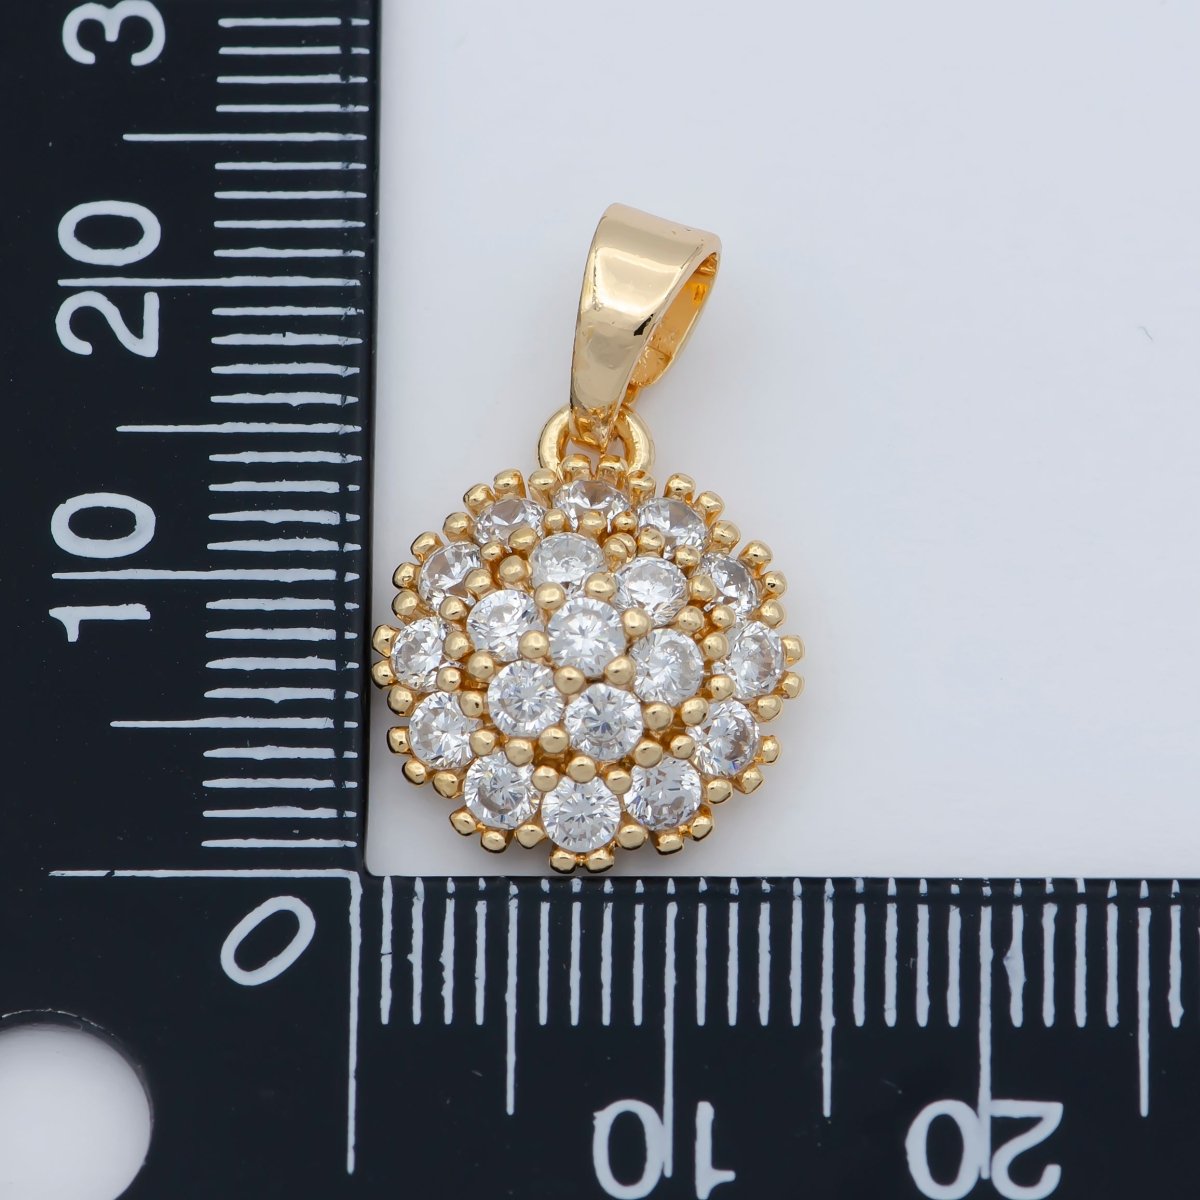 18K Gold Filled Sun CZ paved Charm, Bright Cubic Micro paved Pendant Celestial Jewelry Craft Supply, Sunshine, Sunburst, Nature Lover Gift I-090 - DLUXCA